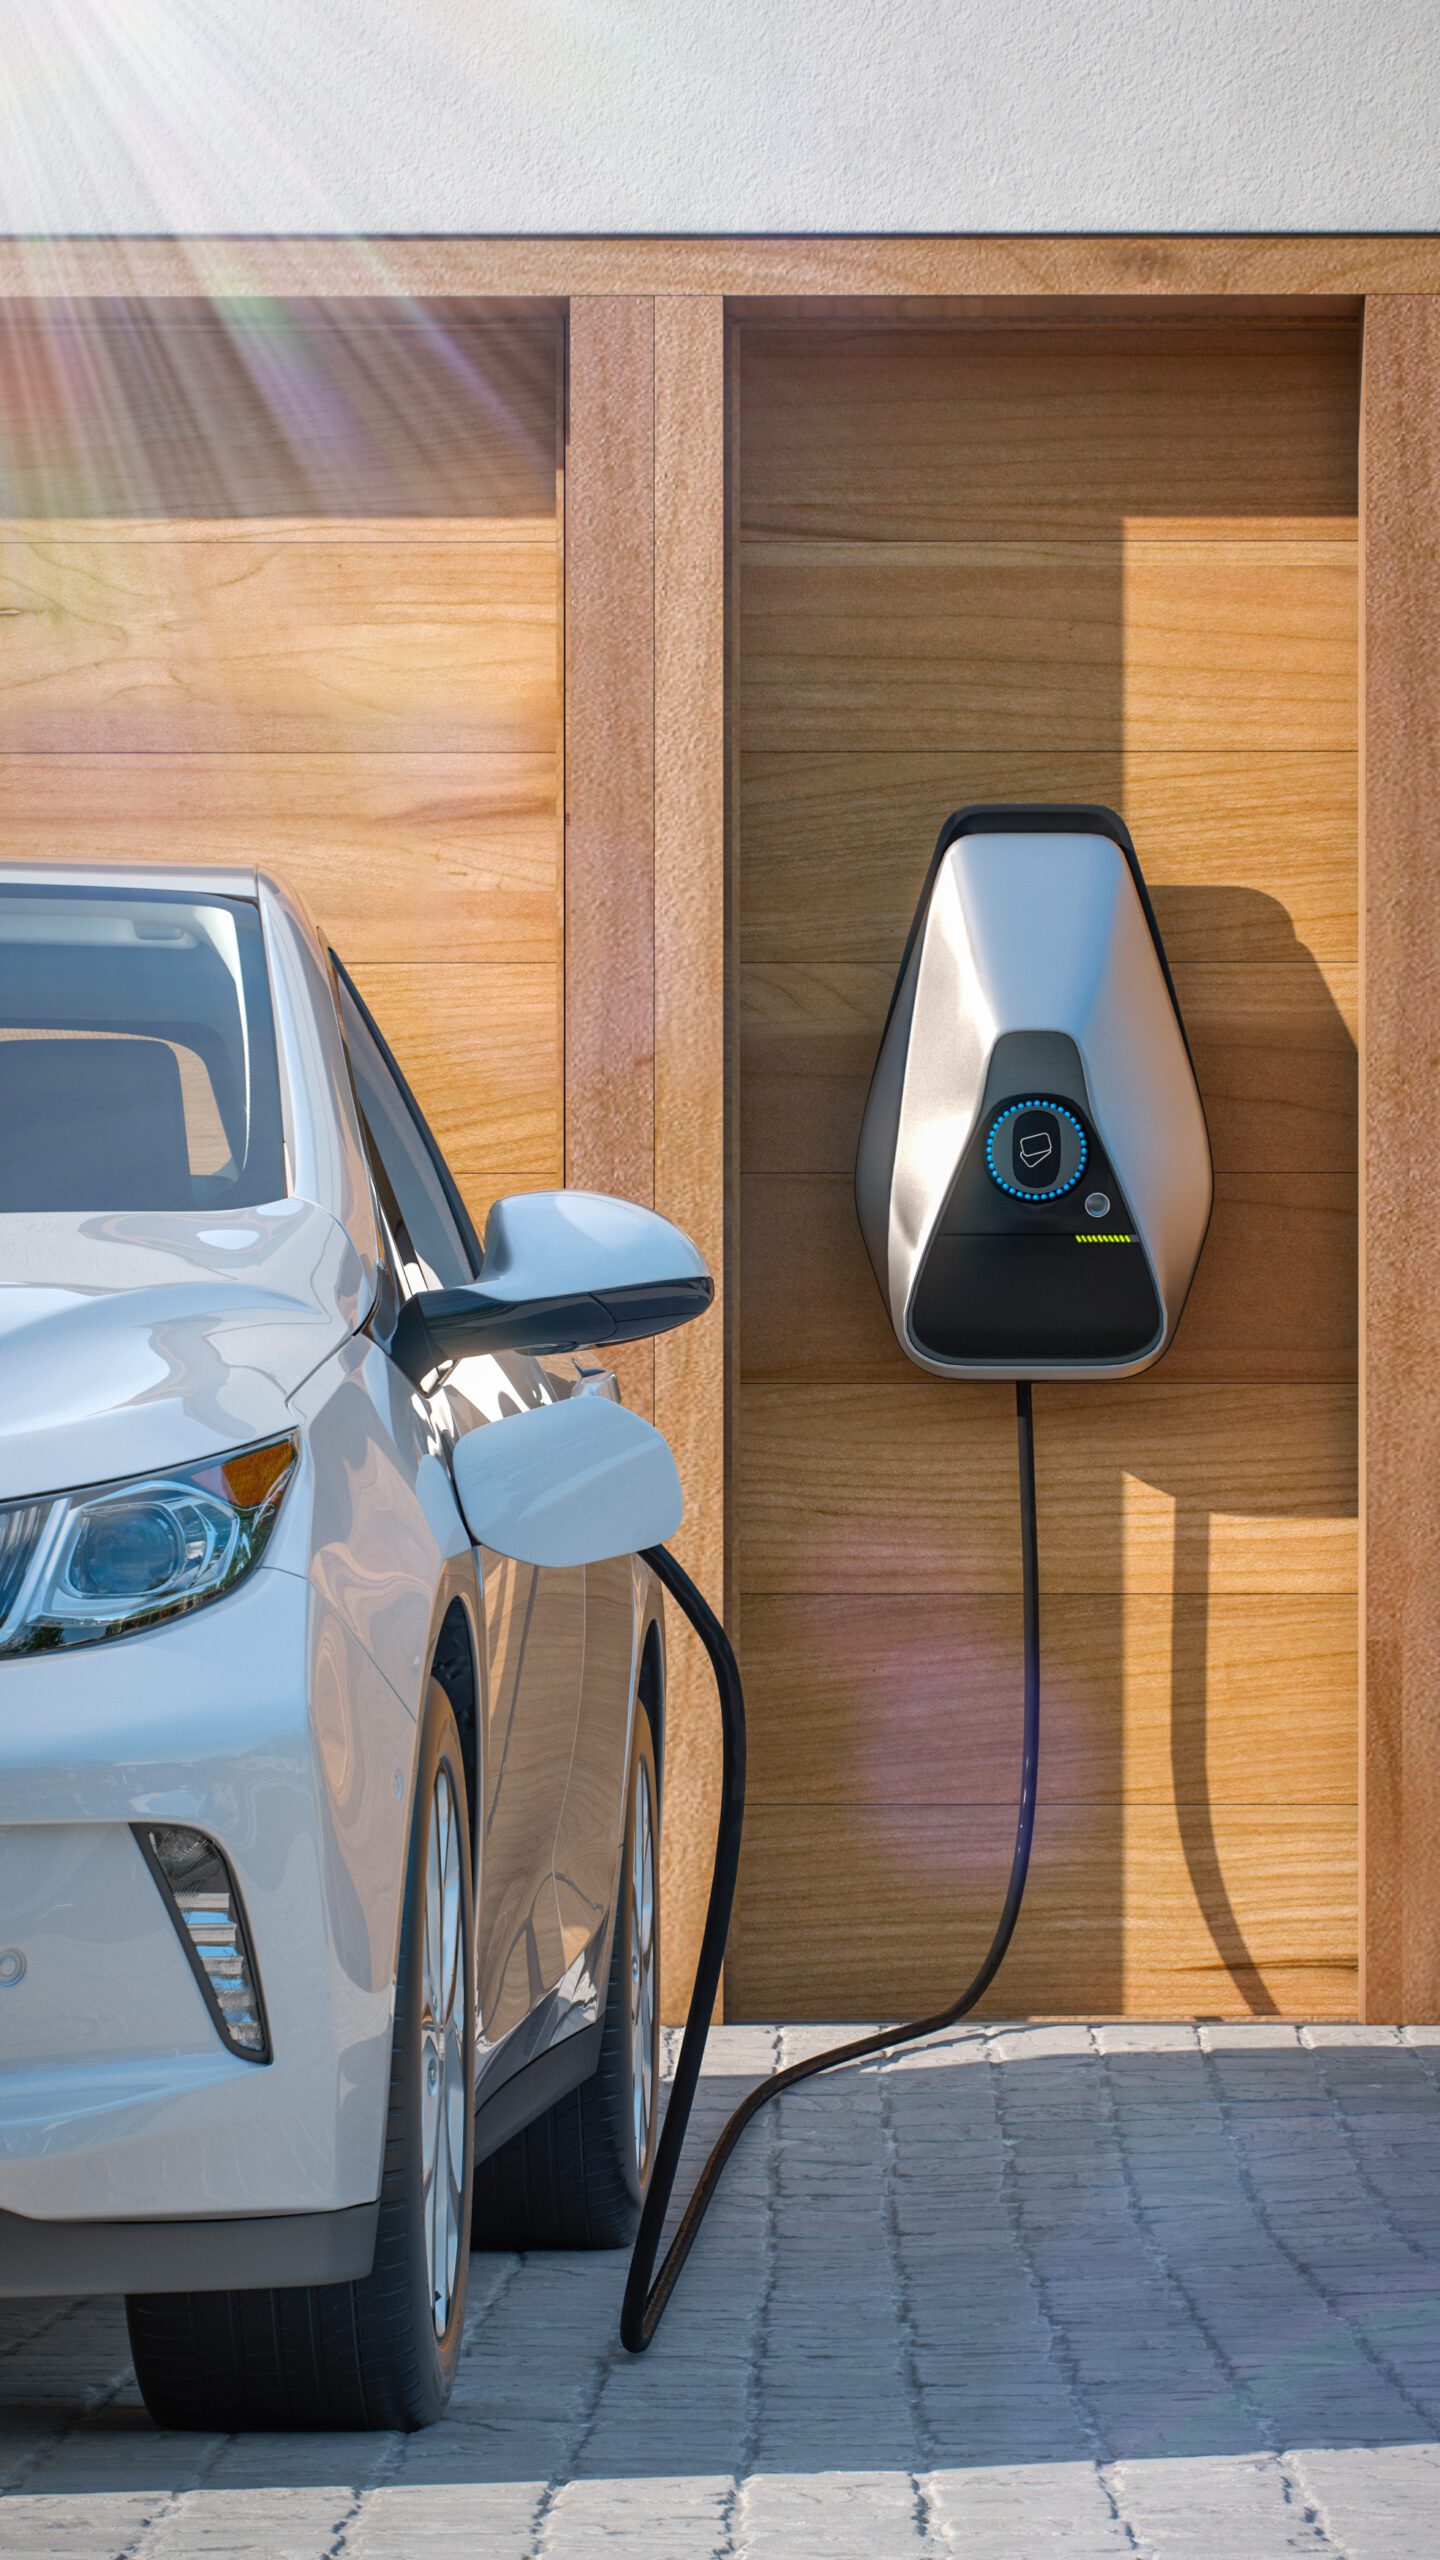 EV Installation Charger - Who can install an electric car charger?